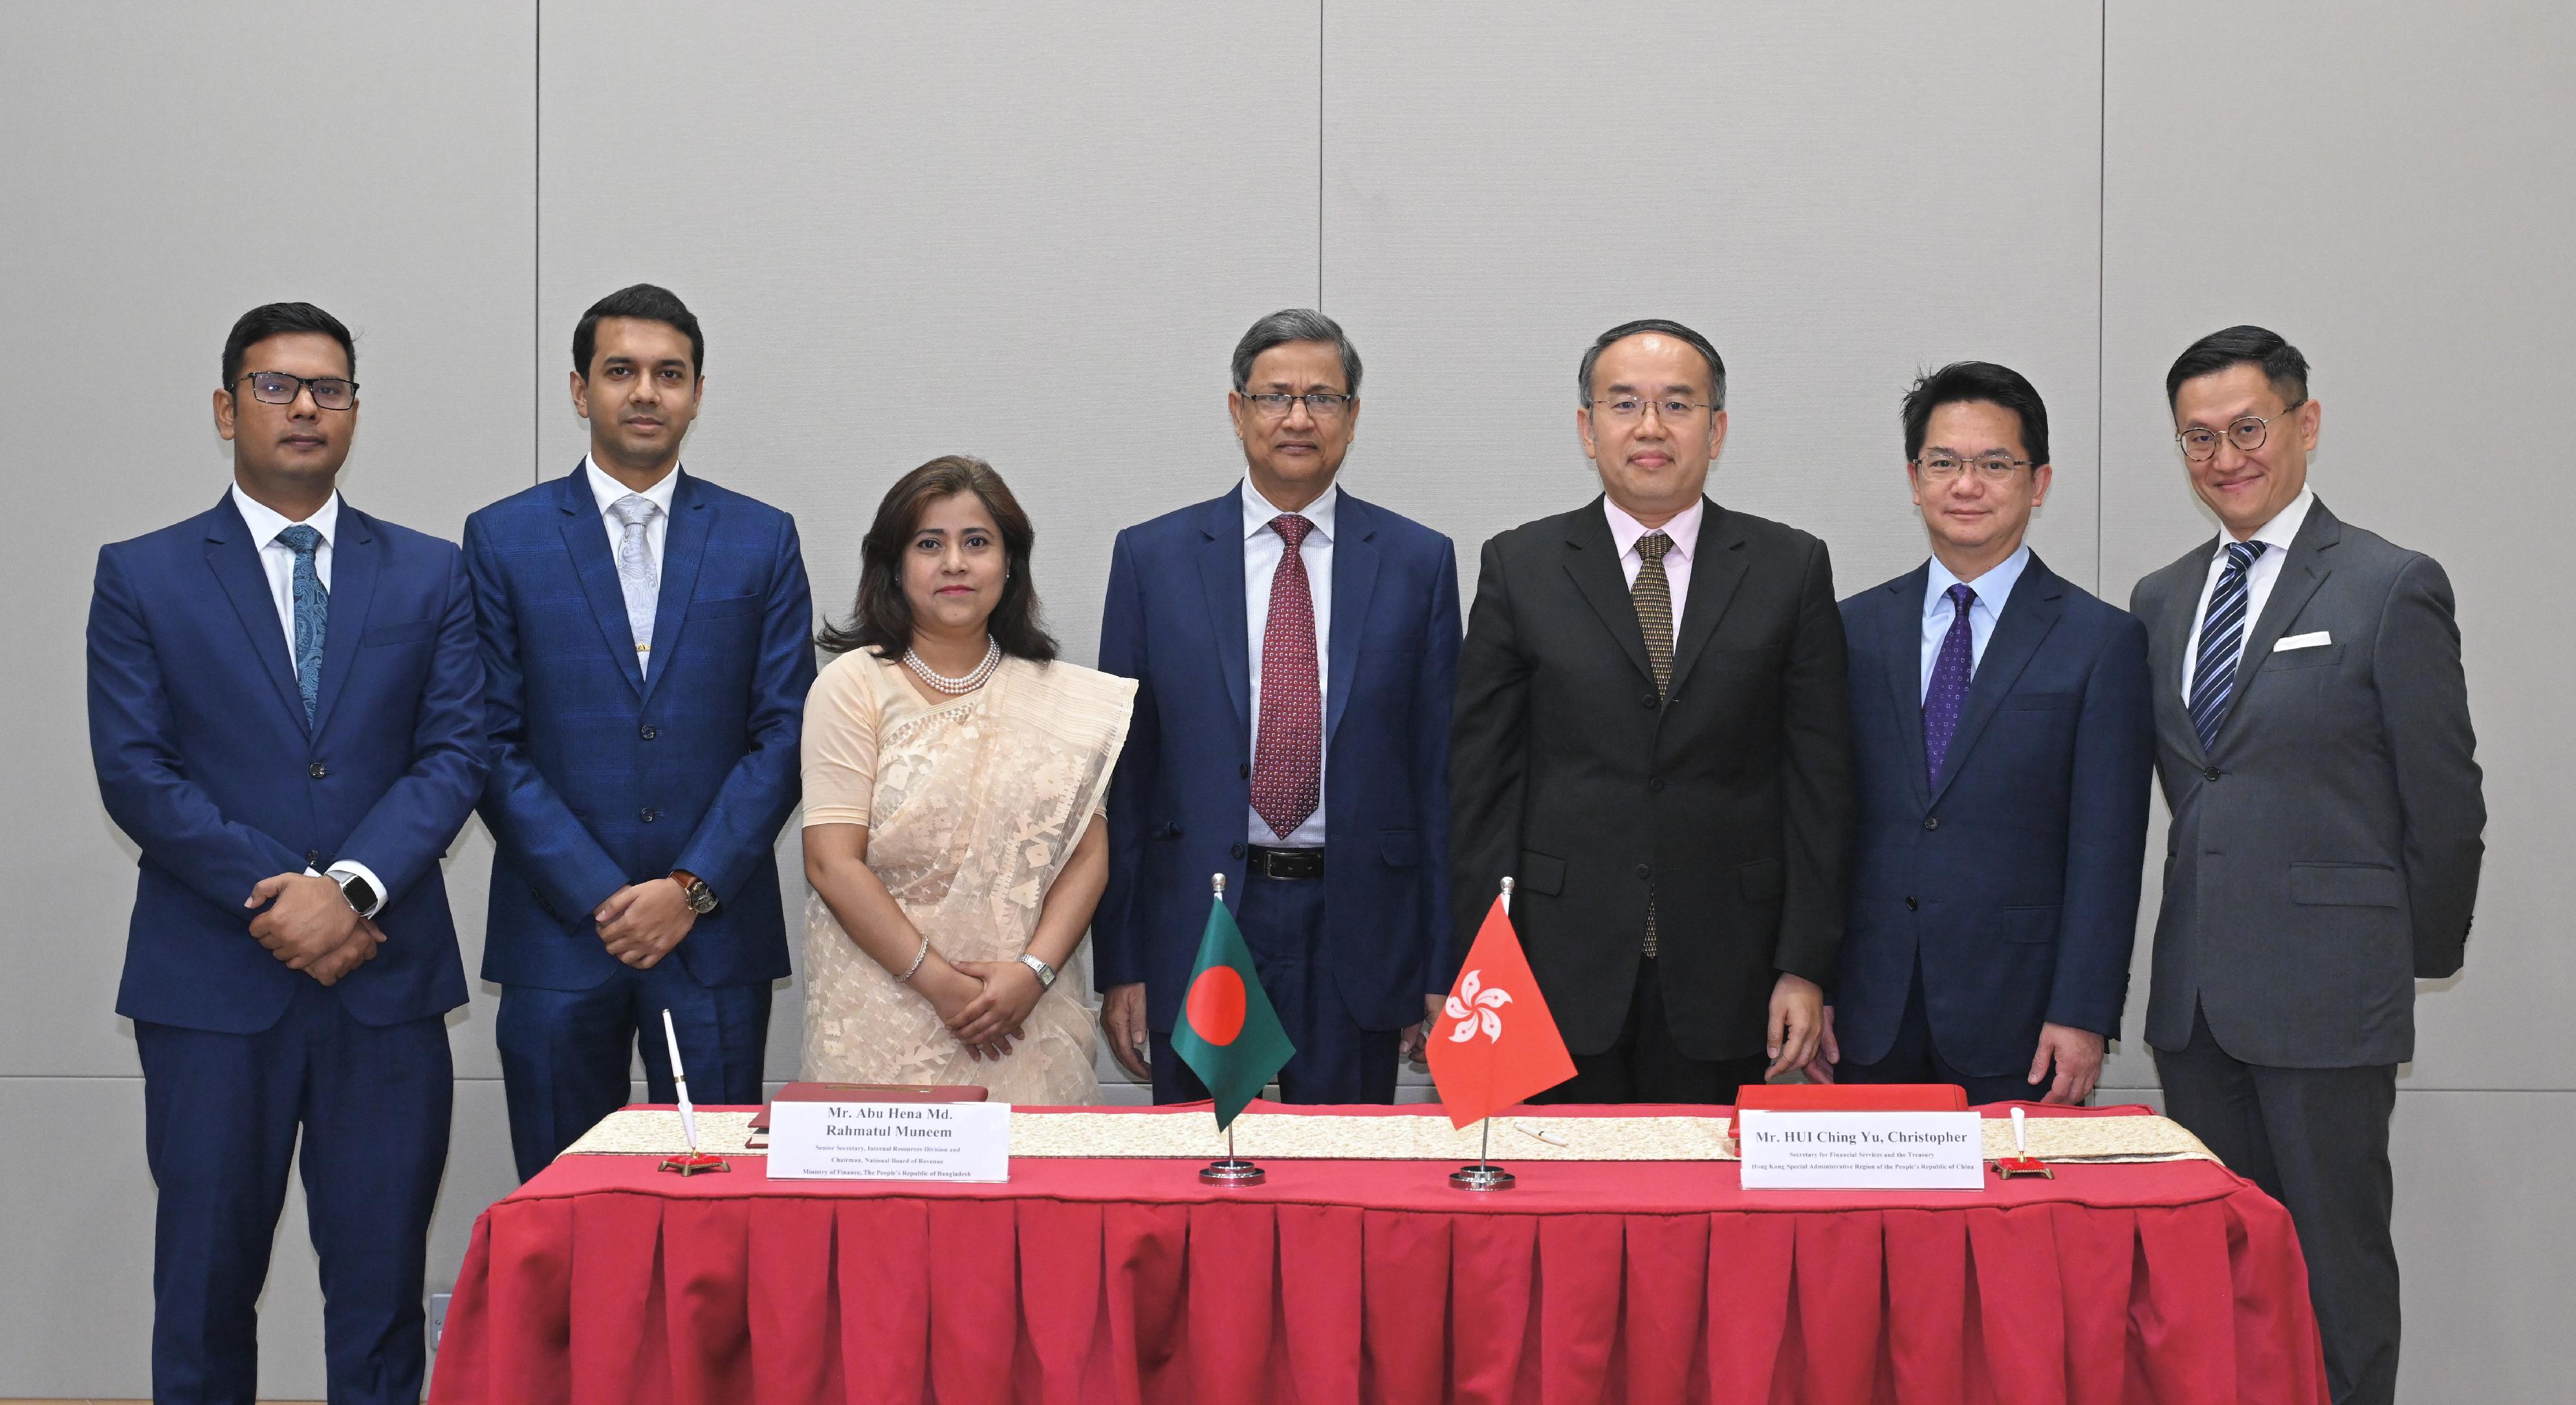 The Secretary for Financial Services and the Treasury, Mr Christopher Hui, and the Senior Secretary of the Internal Resources Division and Chairman of the National Board of Revenue of the Ministry of Finance of Bangladesh, Mr Abu Hena Md. Rahmatul Muneem, today (August 30) signed a comprehensive avoidance of double taxation agreement. Photo shows (from left) the Vice Consul of Bangladesh in Hong Kong, Mr Md Marzuk Islam; the Second Secretary of the National Board of Revenue of Bangladesh, Mr Ferdouse Hoque Shakur; the Consul-General of Bangladesh in Hong Kong, Ms Israt Ara; Mr Muneem; Mr Hui; the Commissioner of Inland Revenue, Mr Tam Tai-pang; and the Acting Permanent Secretary for Financial Services and the Treasury (Treasury), Mr Maurice Loo, at the ceremony.